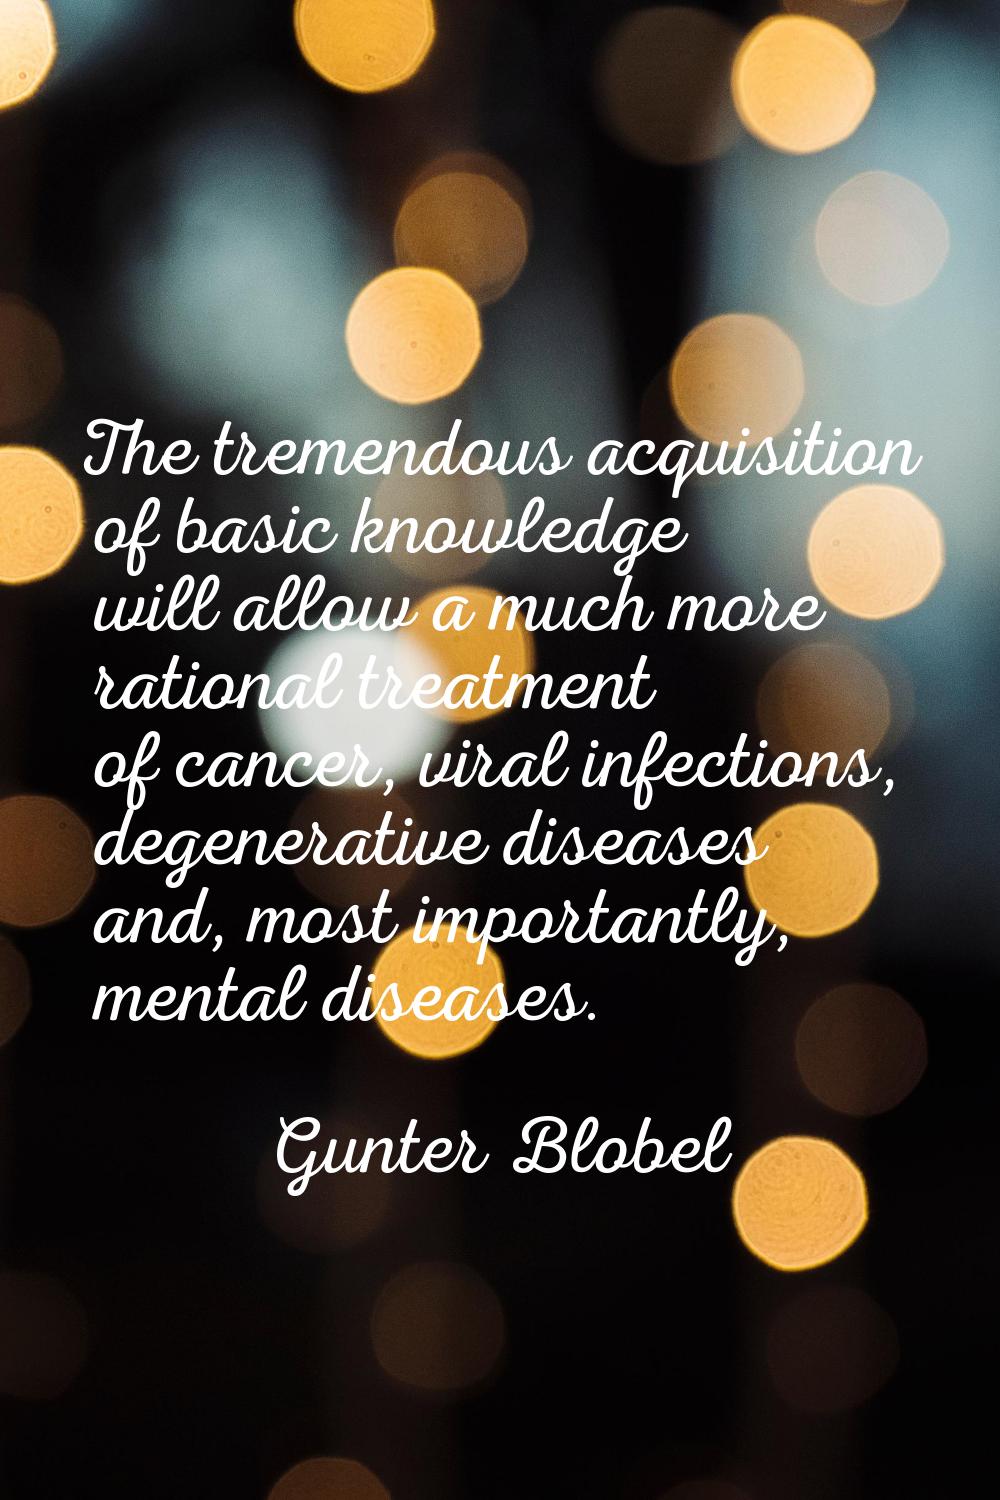 The tremendous acquisition of basic knowledge will allow a much more rational treatment of cancer, 